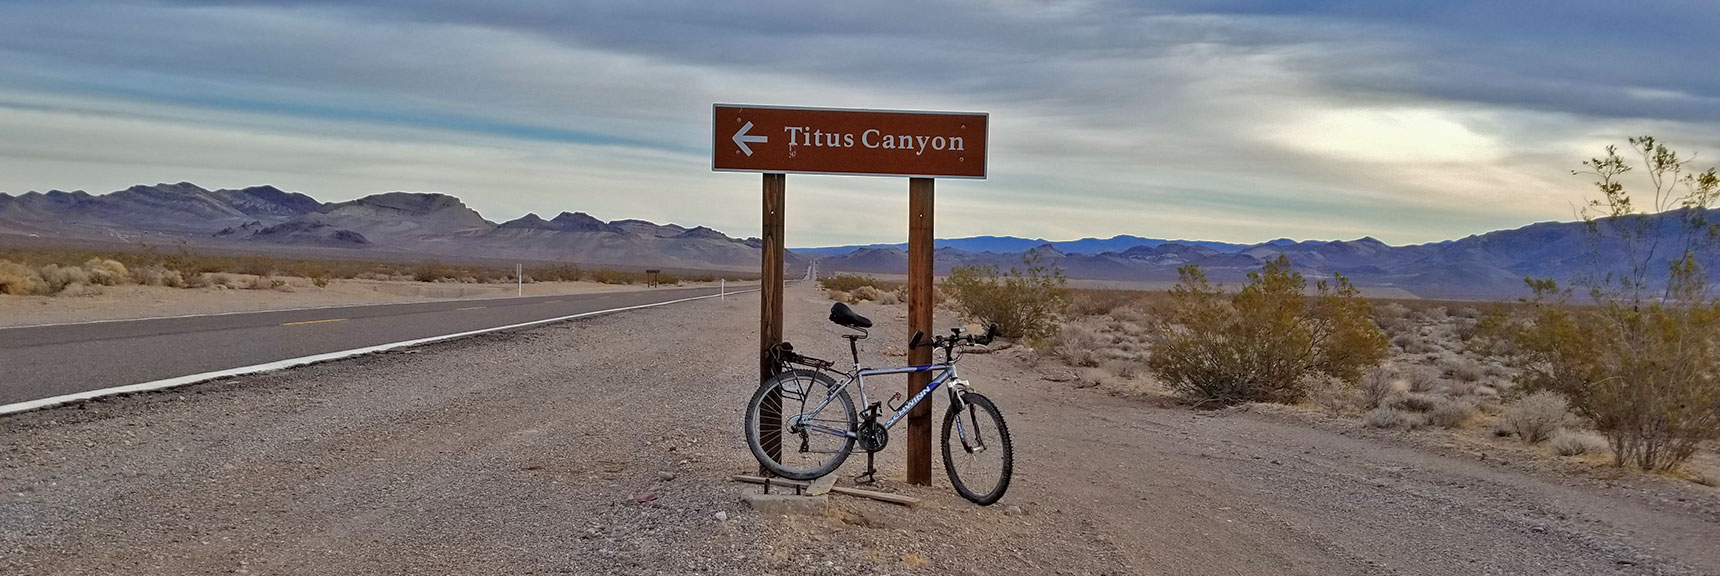 Mountain Bike Resting on Daylight Pass Road at the Upper End of Titus Canyon Road | Titus Canyon Grand Loop by Mountain Bike | Death Valley National Park, California